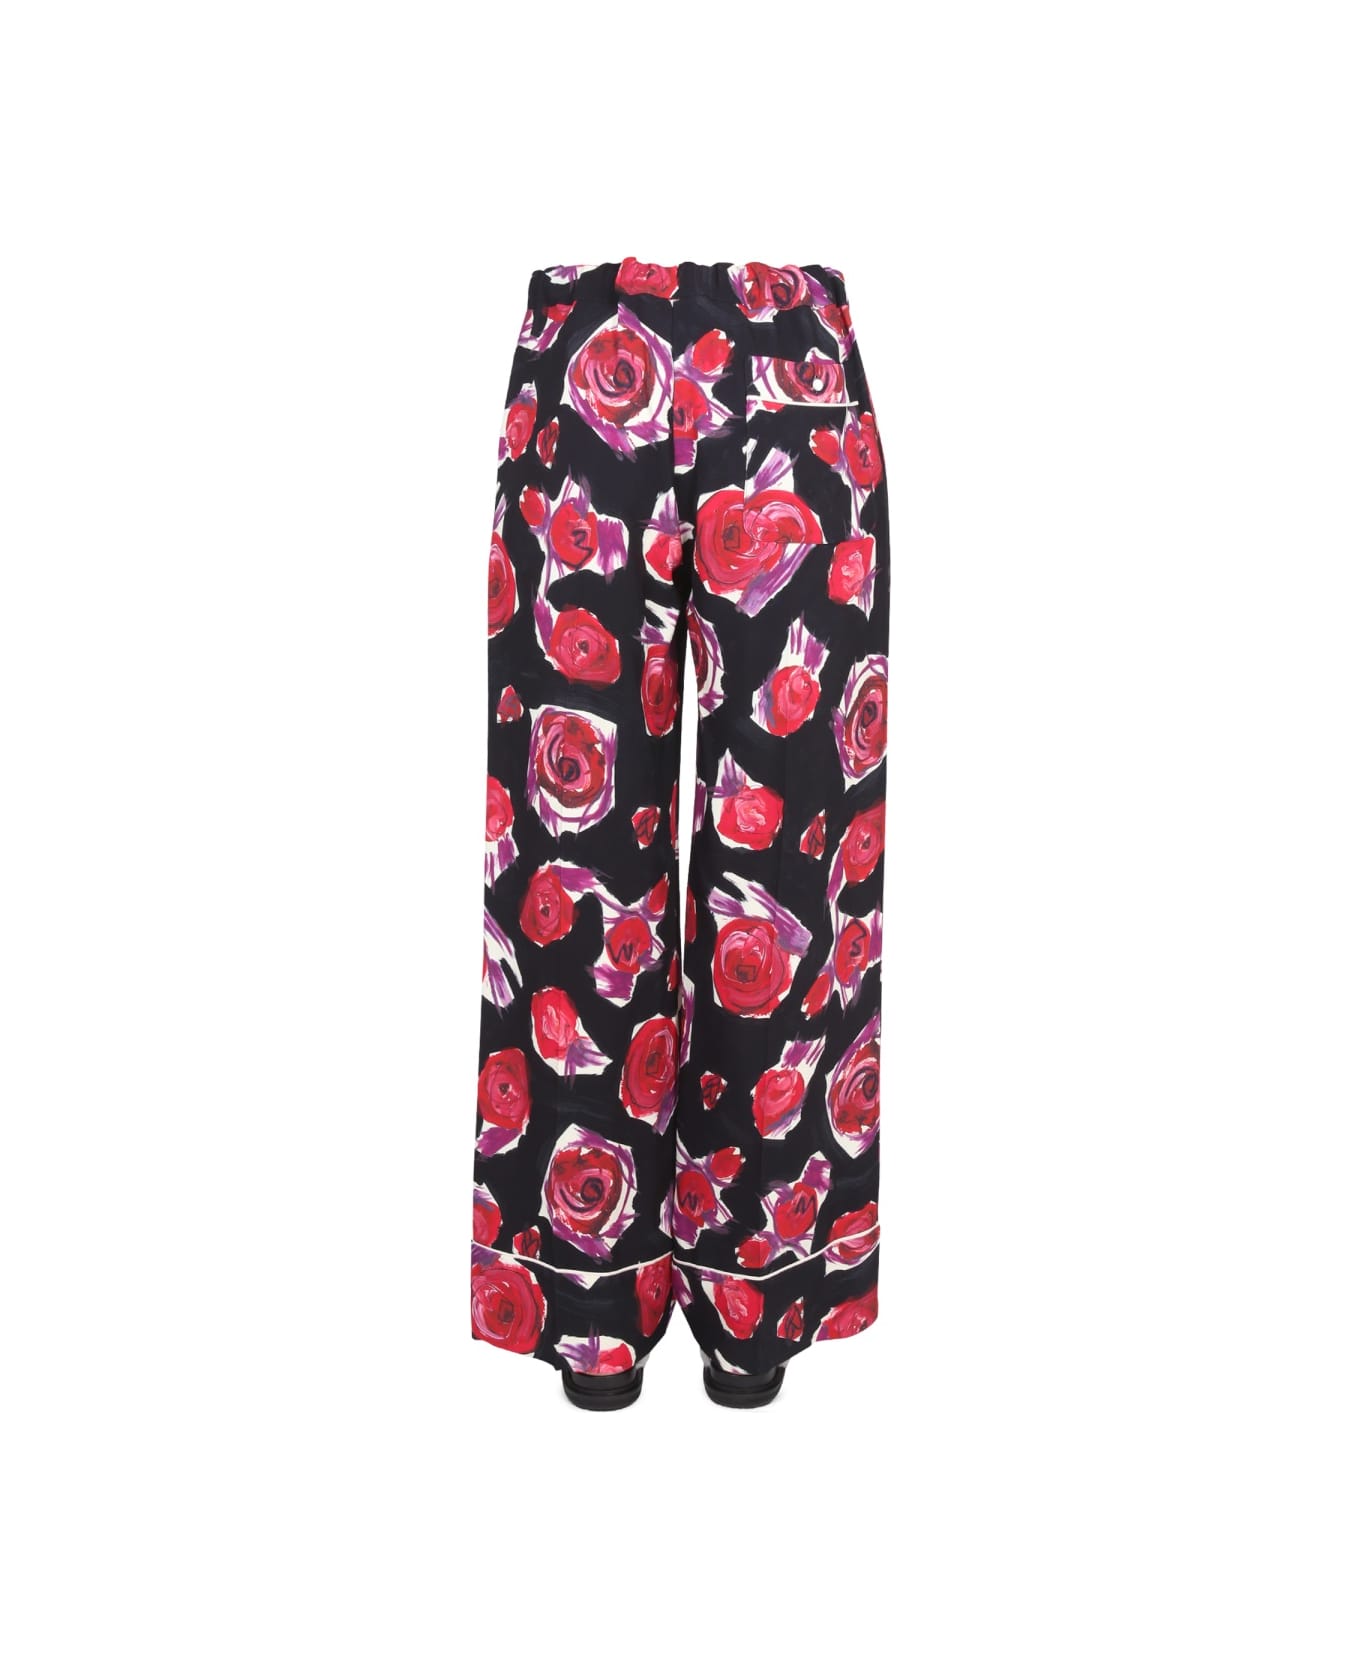 Marni Pijama Pants With Floral Pattern - MULTICOLOUR